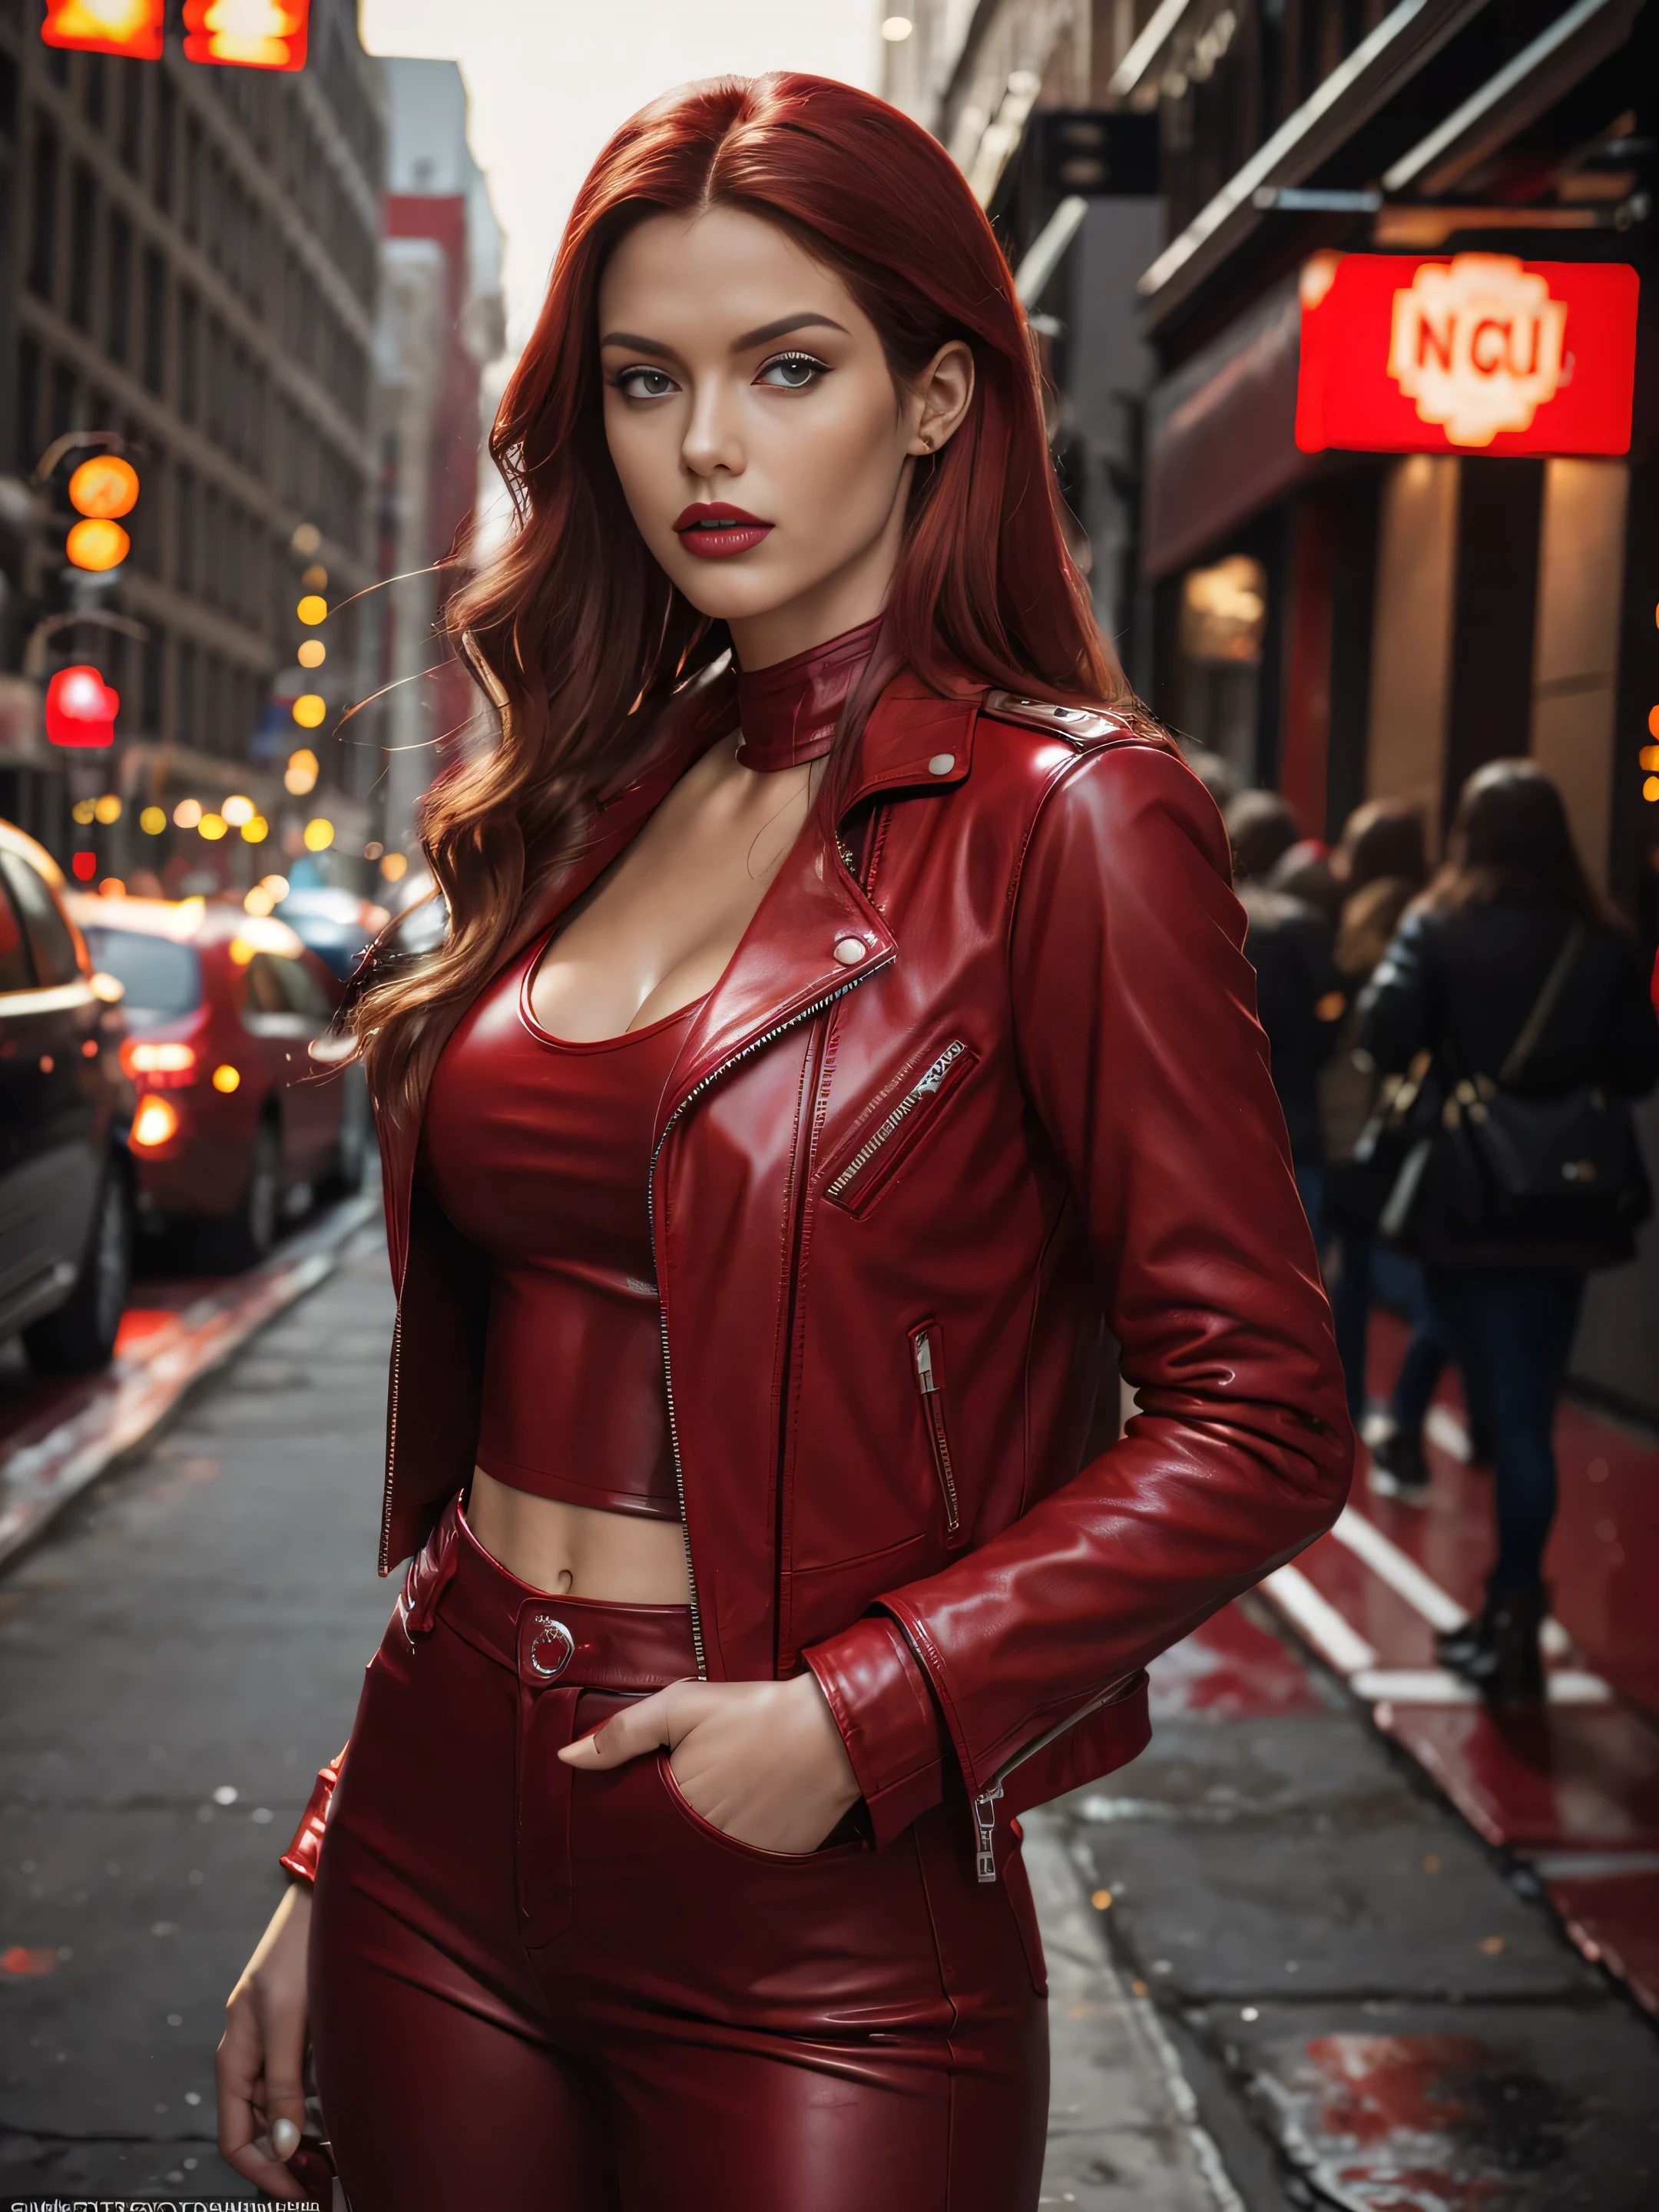 in photorealistic style, a red woman with long hair in red leather pants and a red leather jacket stands in the New York street midnight